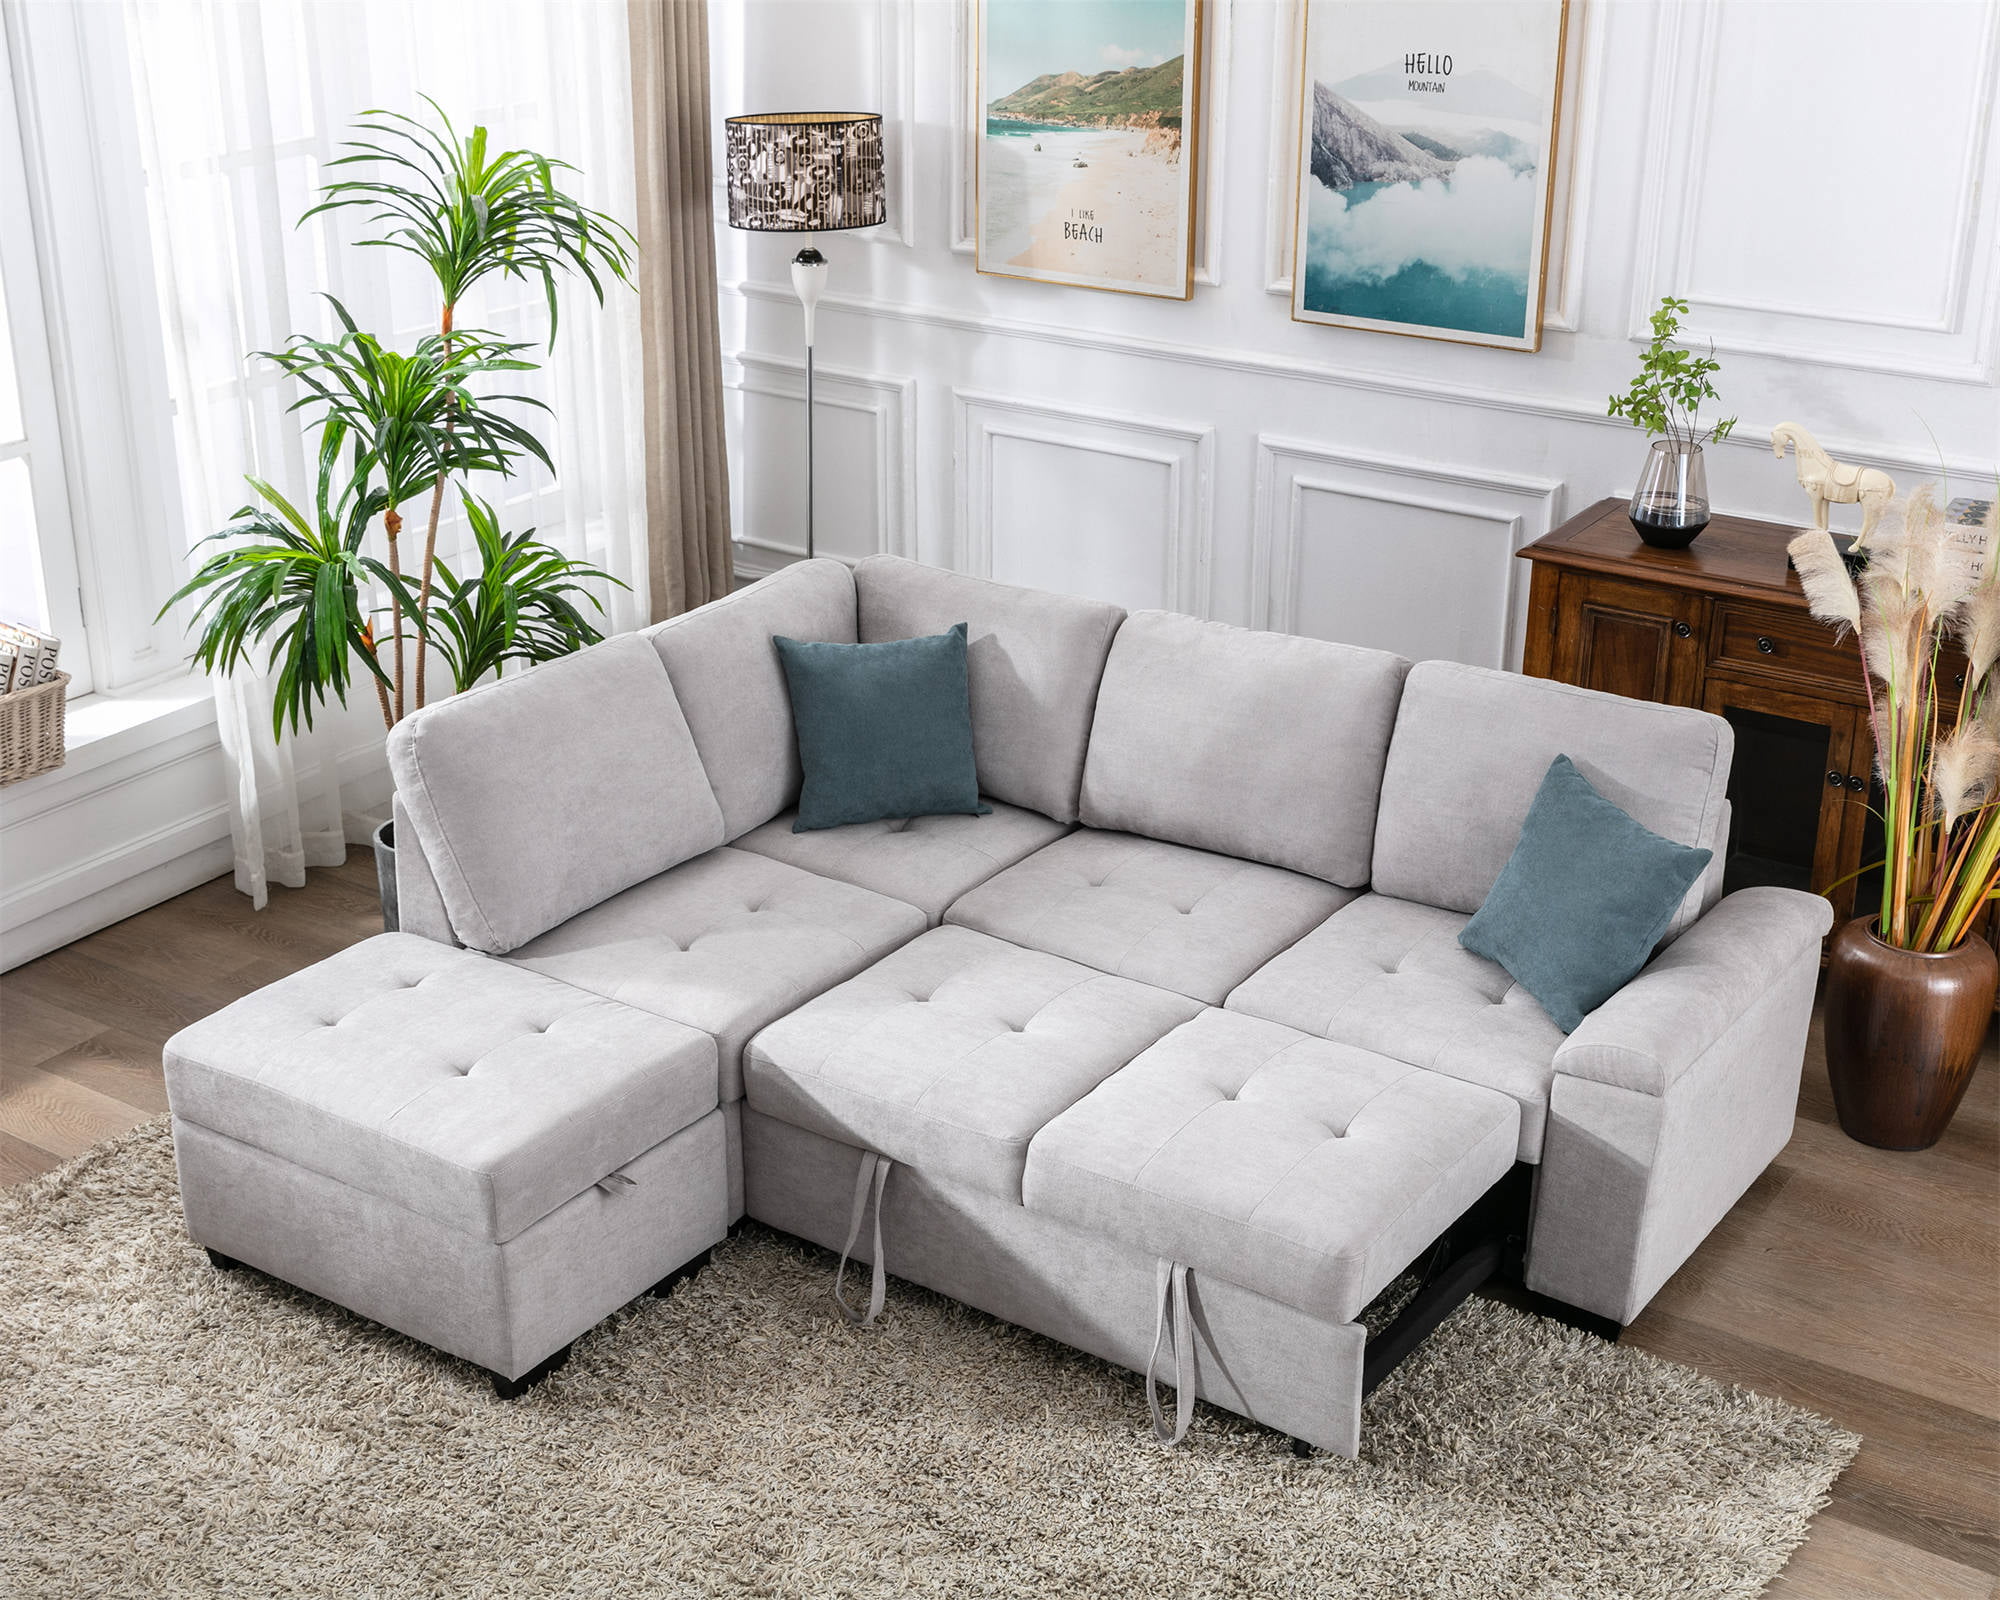 SOFA SECTIONAL SLEEPER PULL OUT QUEEN BED CHAIR COUCH DORM LIVING ROOM FURNITURE 